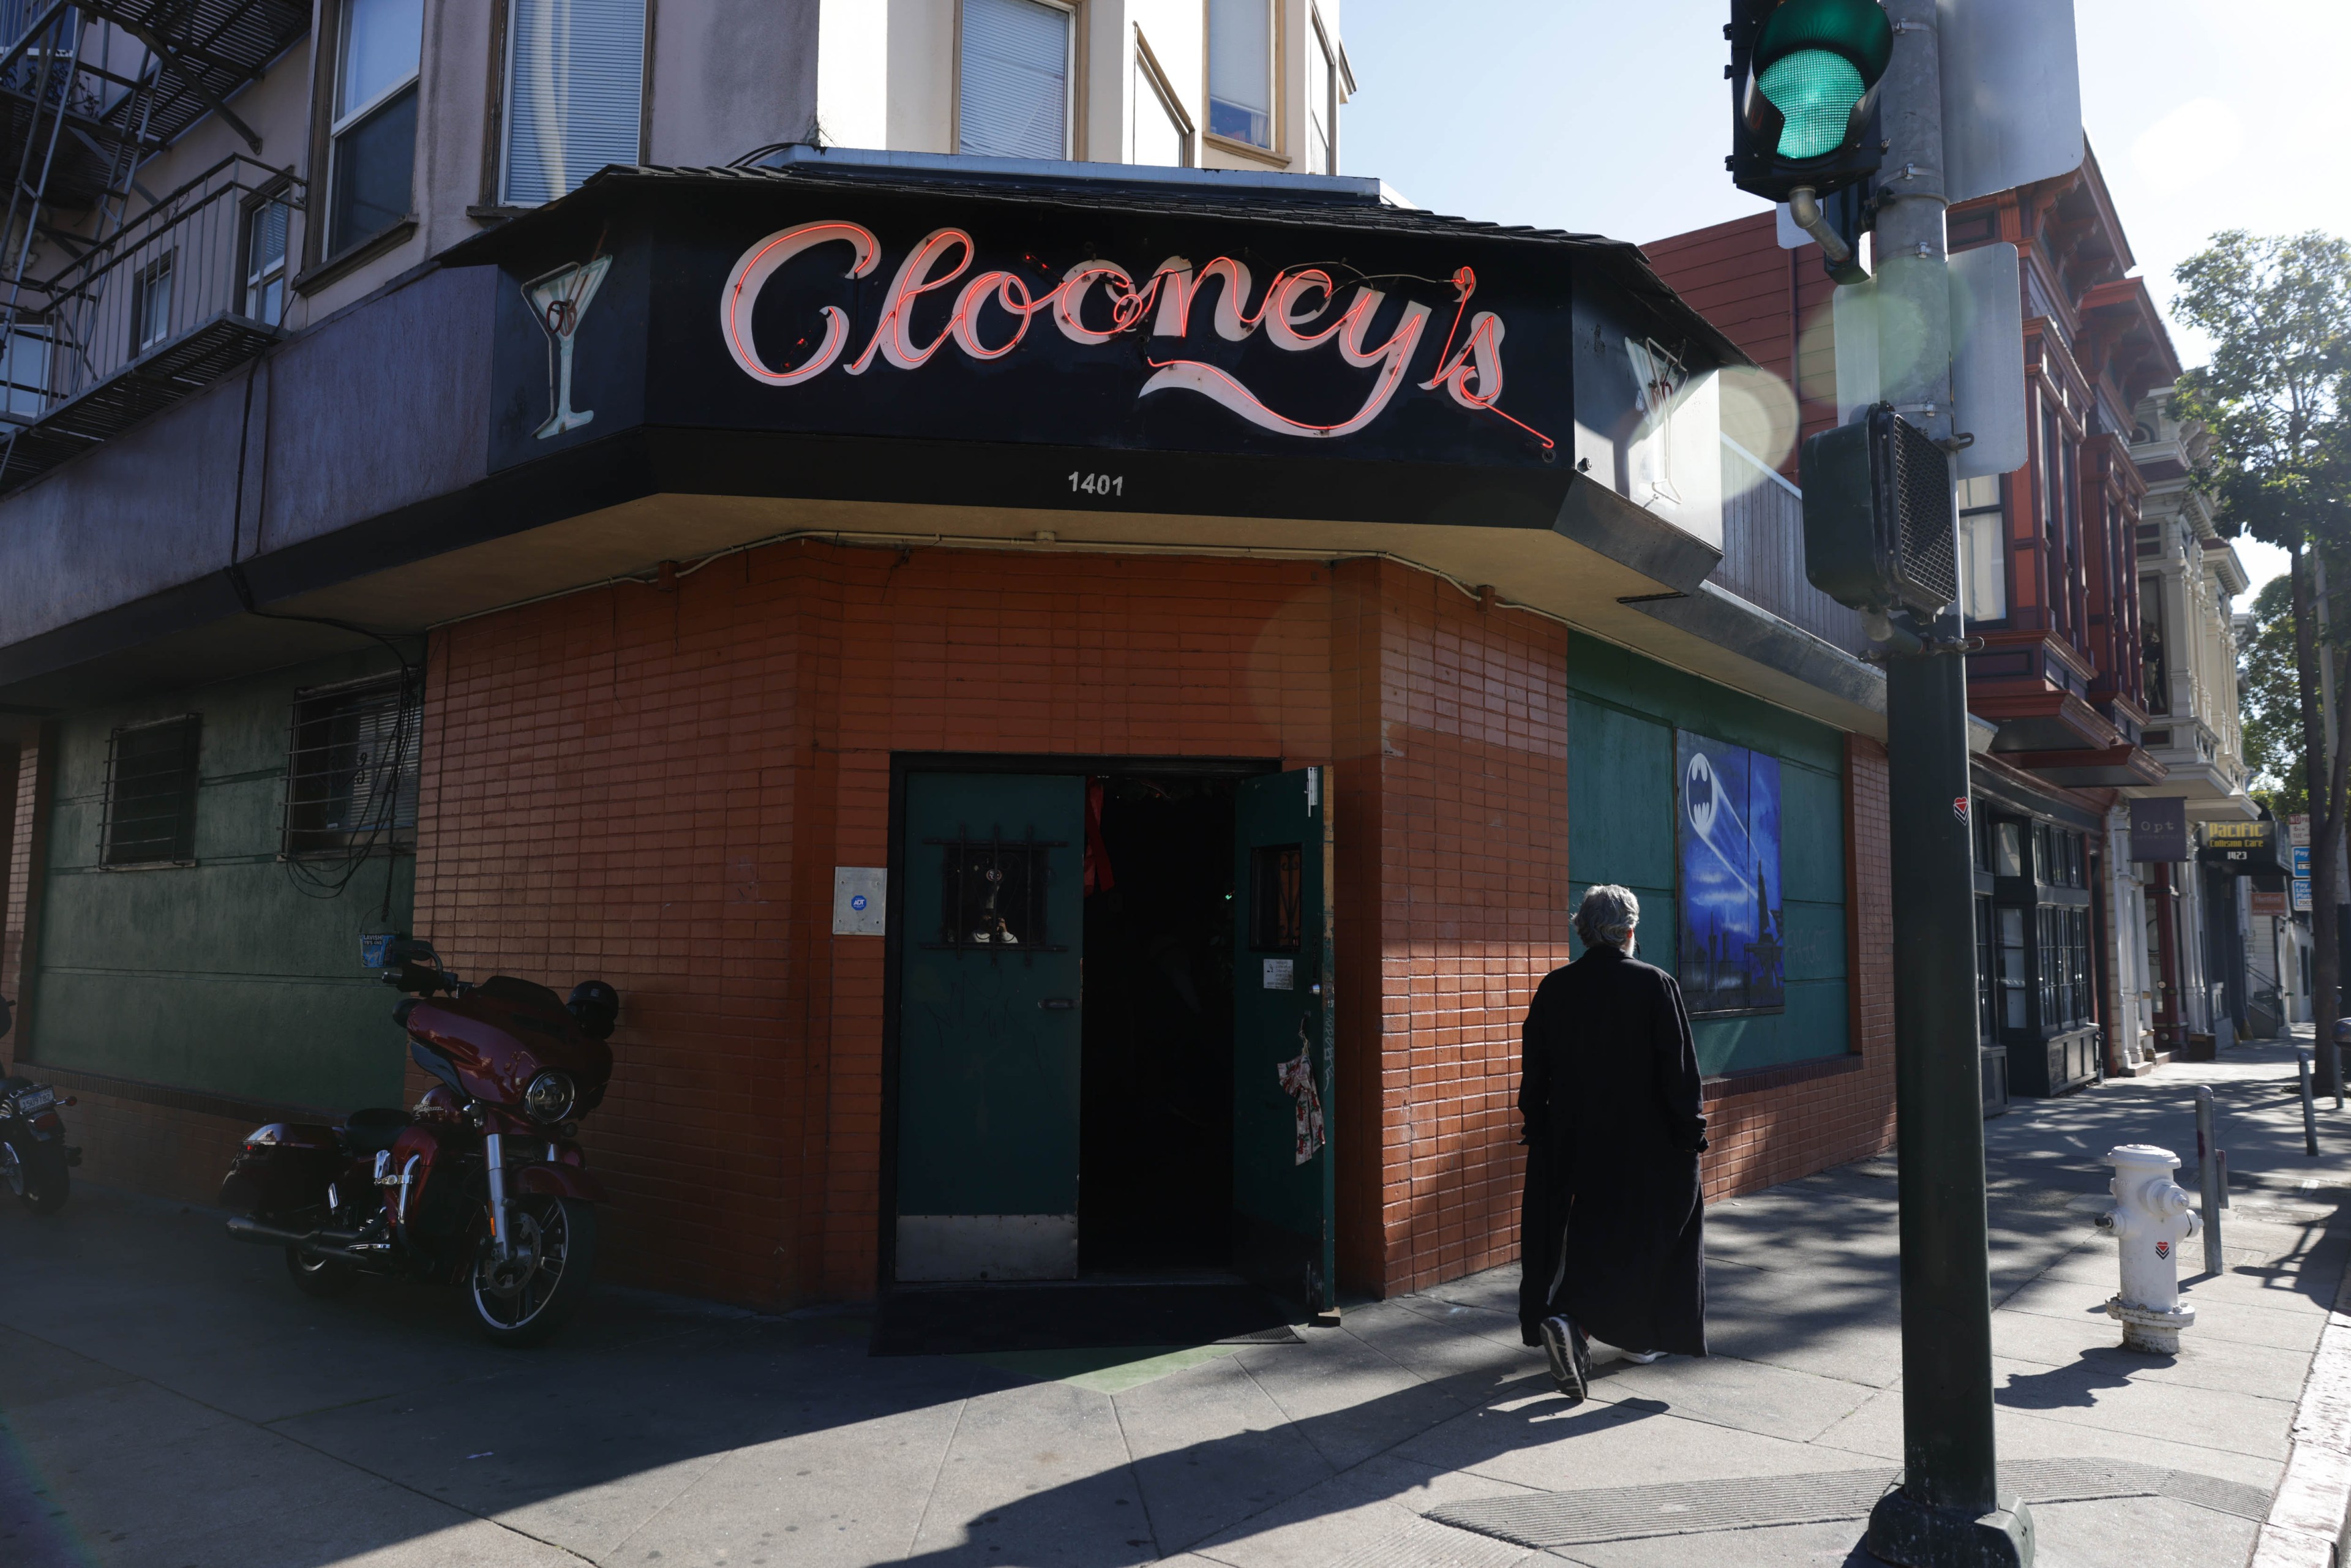 The front of a bar with a neon sign reading &quot;Clooney's&quot; sits on street corner.